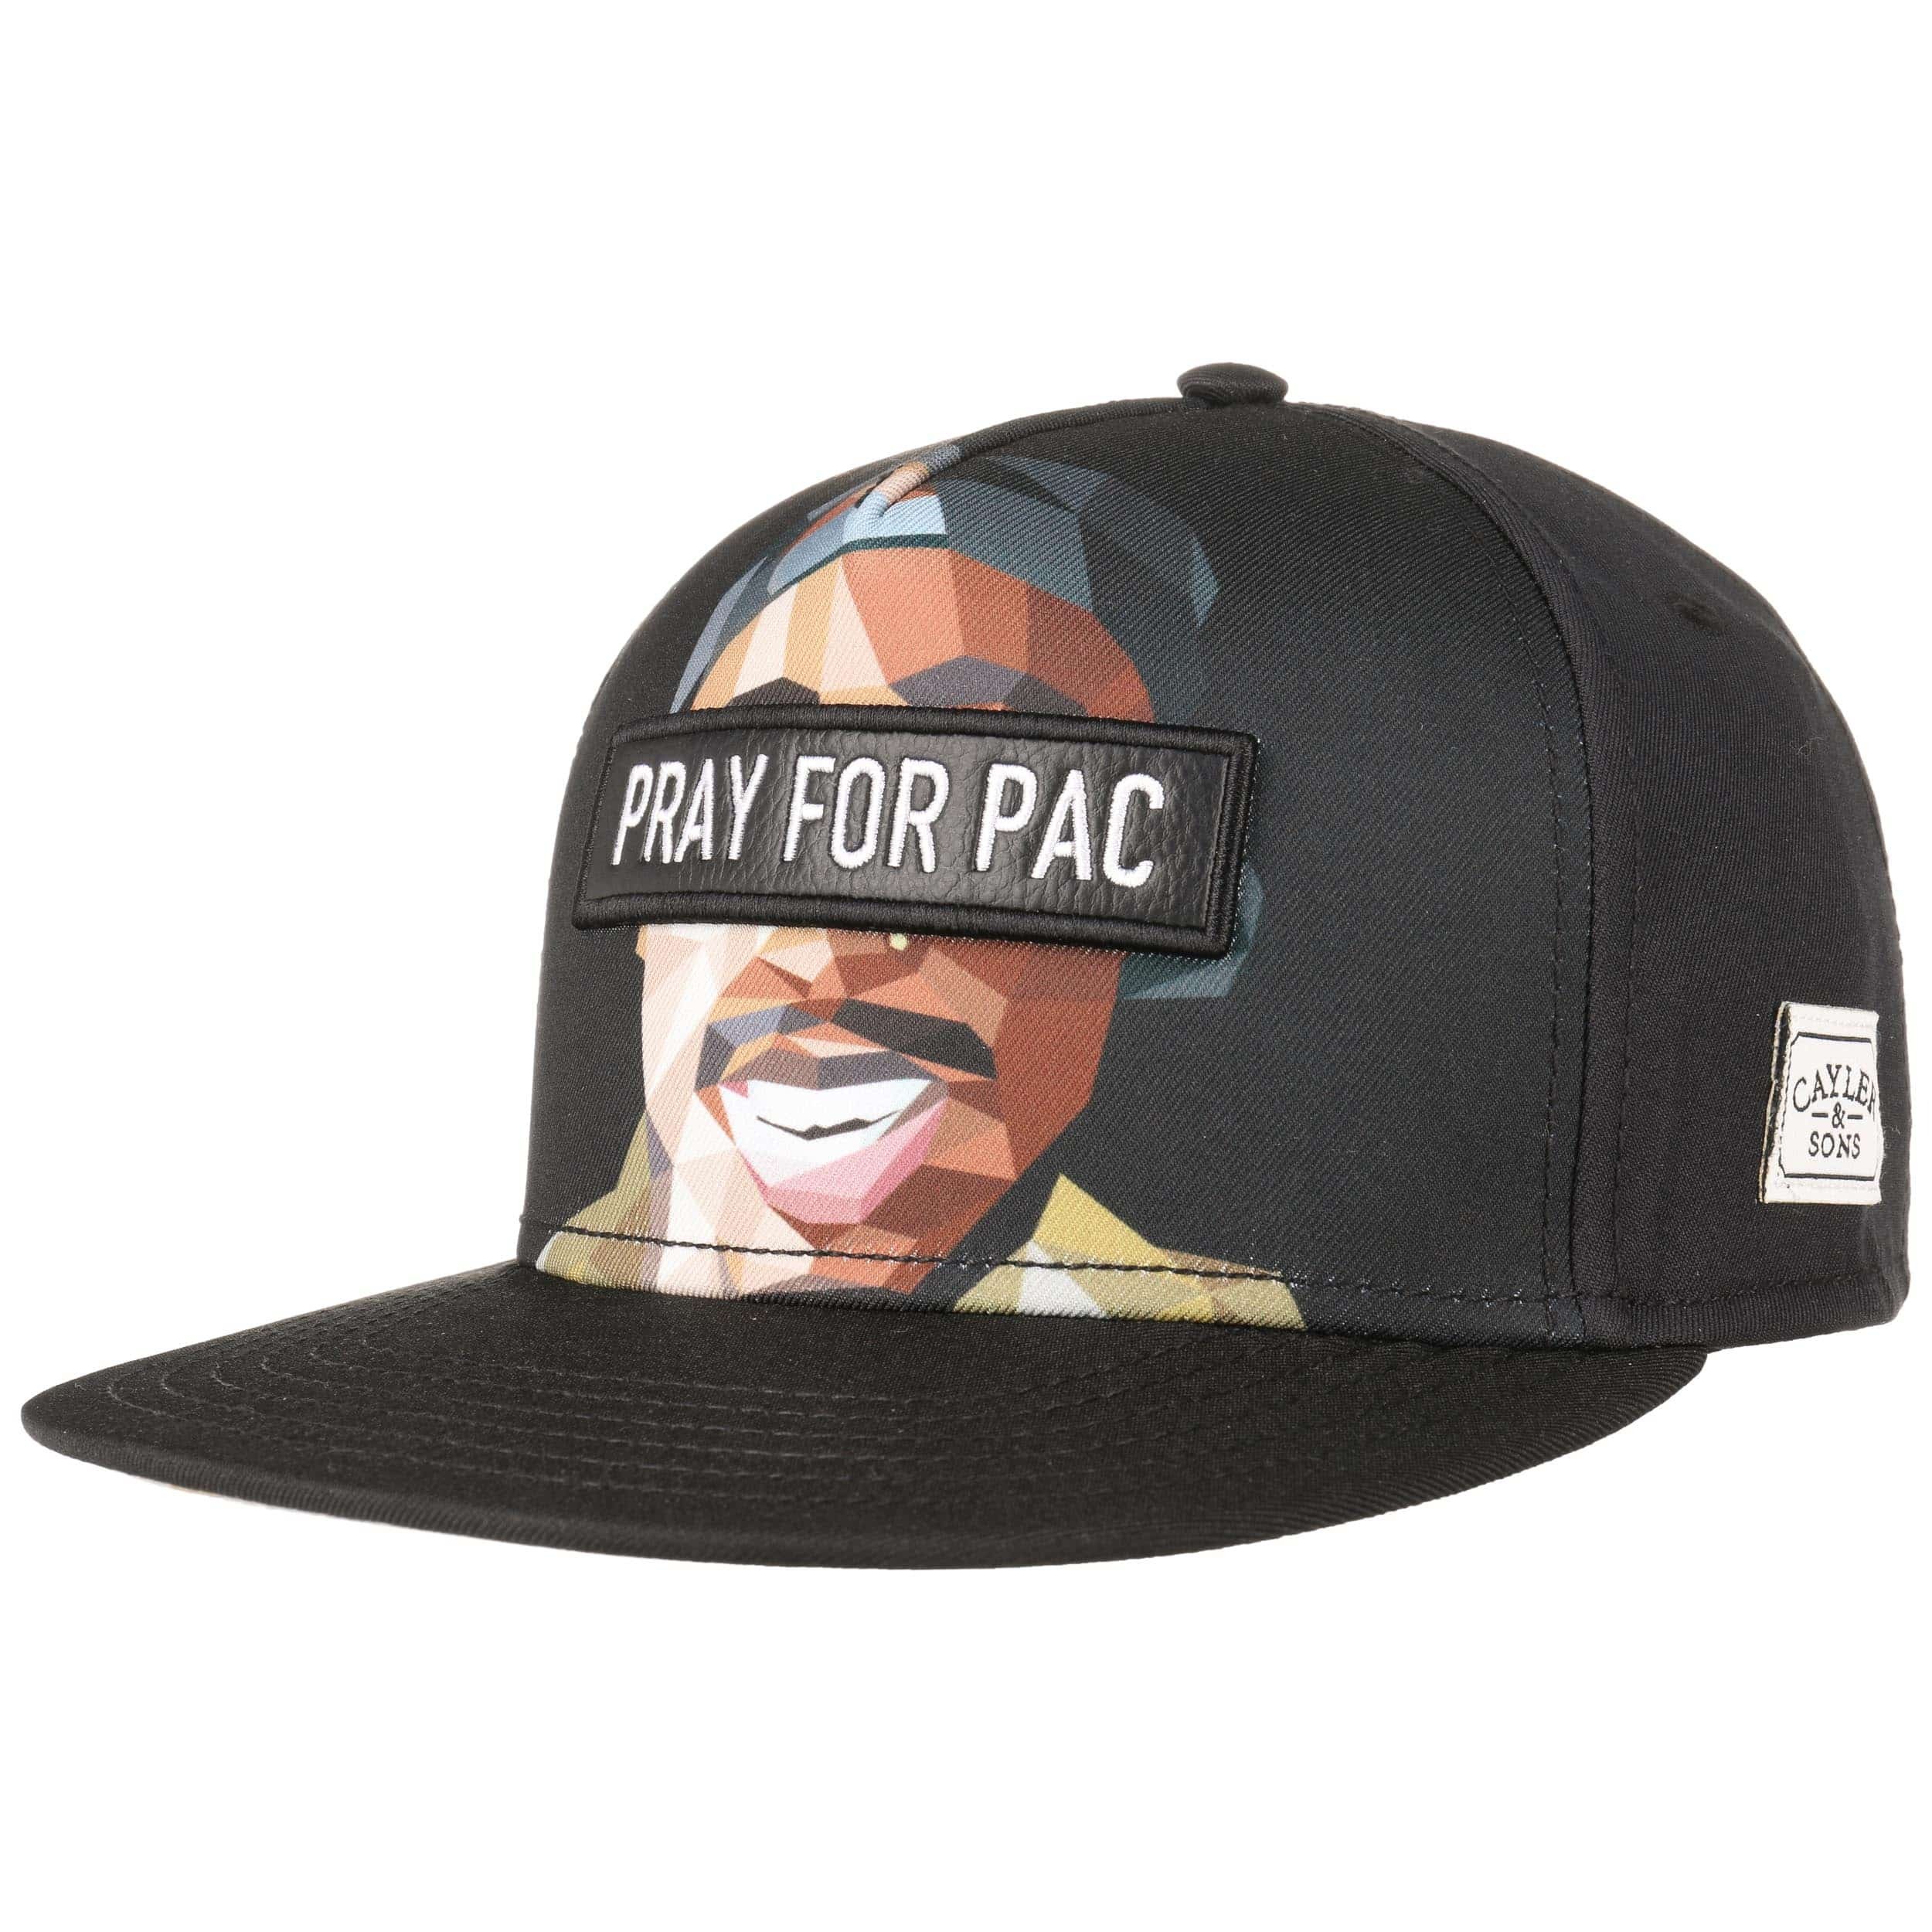 Pacasso Snapback Cap by Cayler & € Sons 37,95 